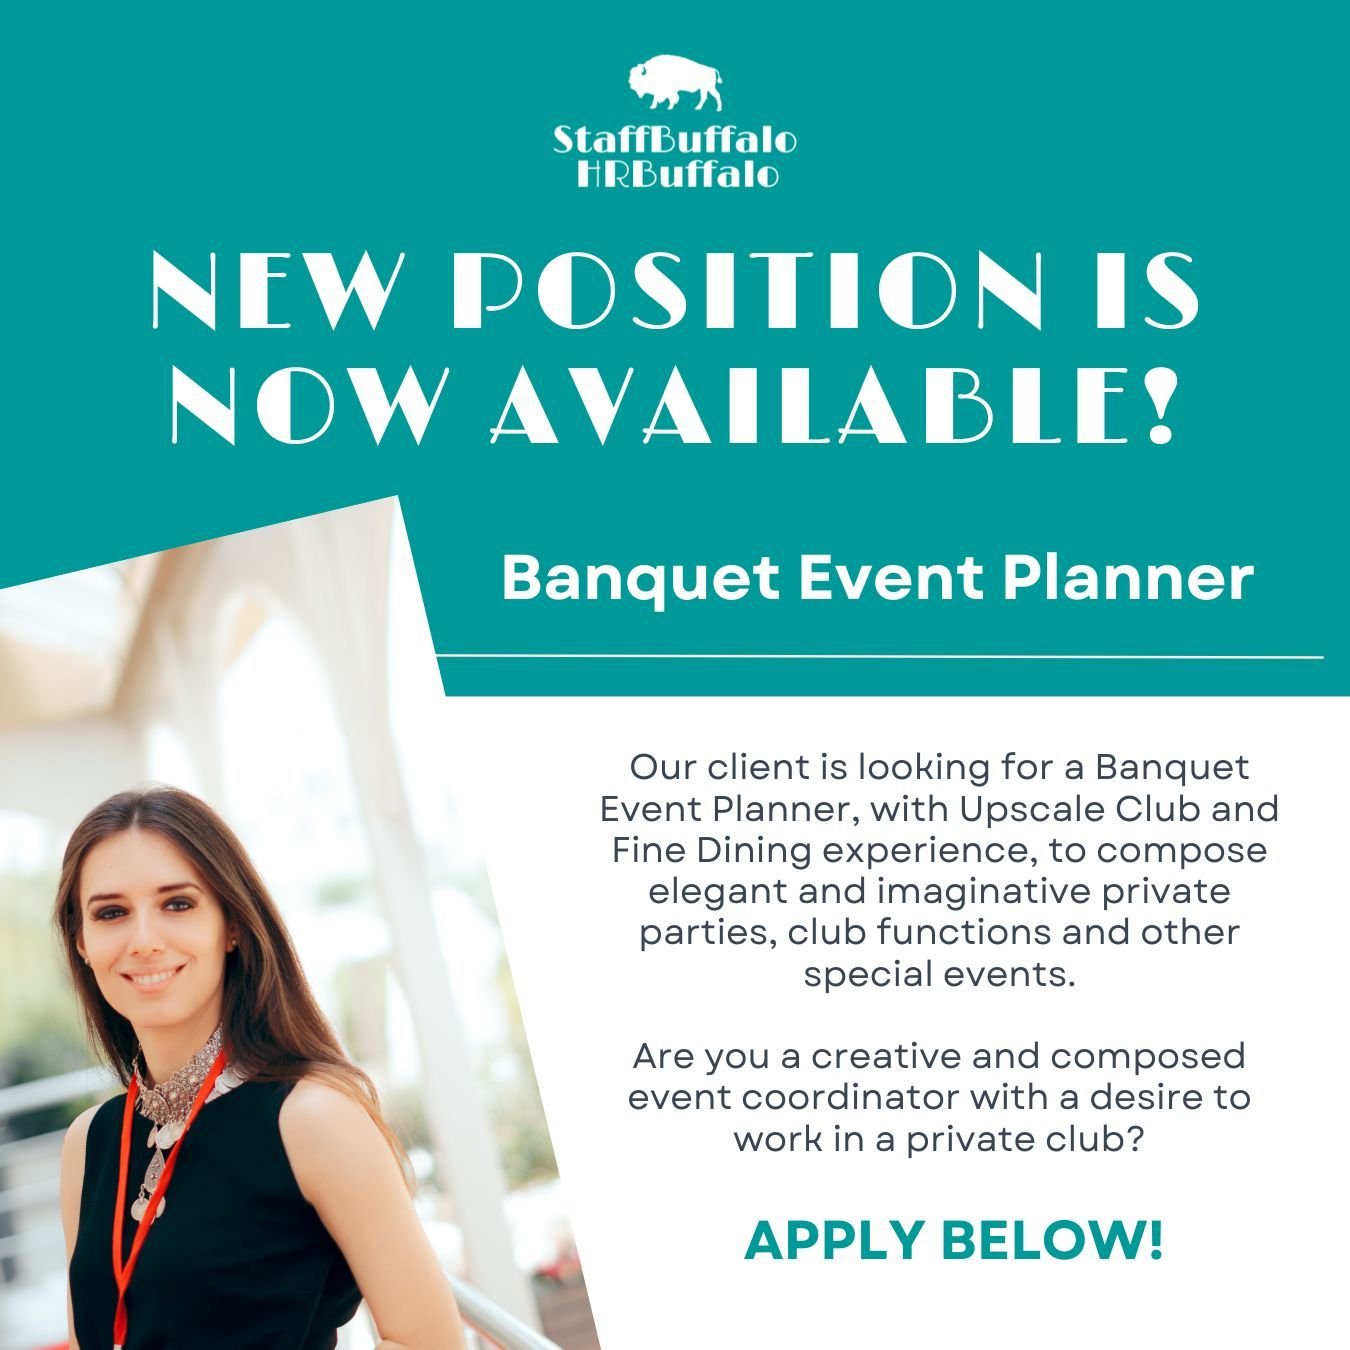 Our client, a private club known for its elegance in Buffalo, NY, is looking for a Banquet Event Planner to create unforgettable experiences. If you thrive in a fine dining environment and want to uphold cherished traditions, this could be your dream